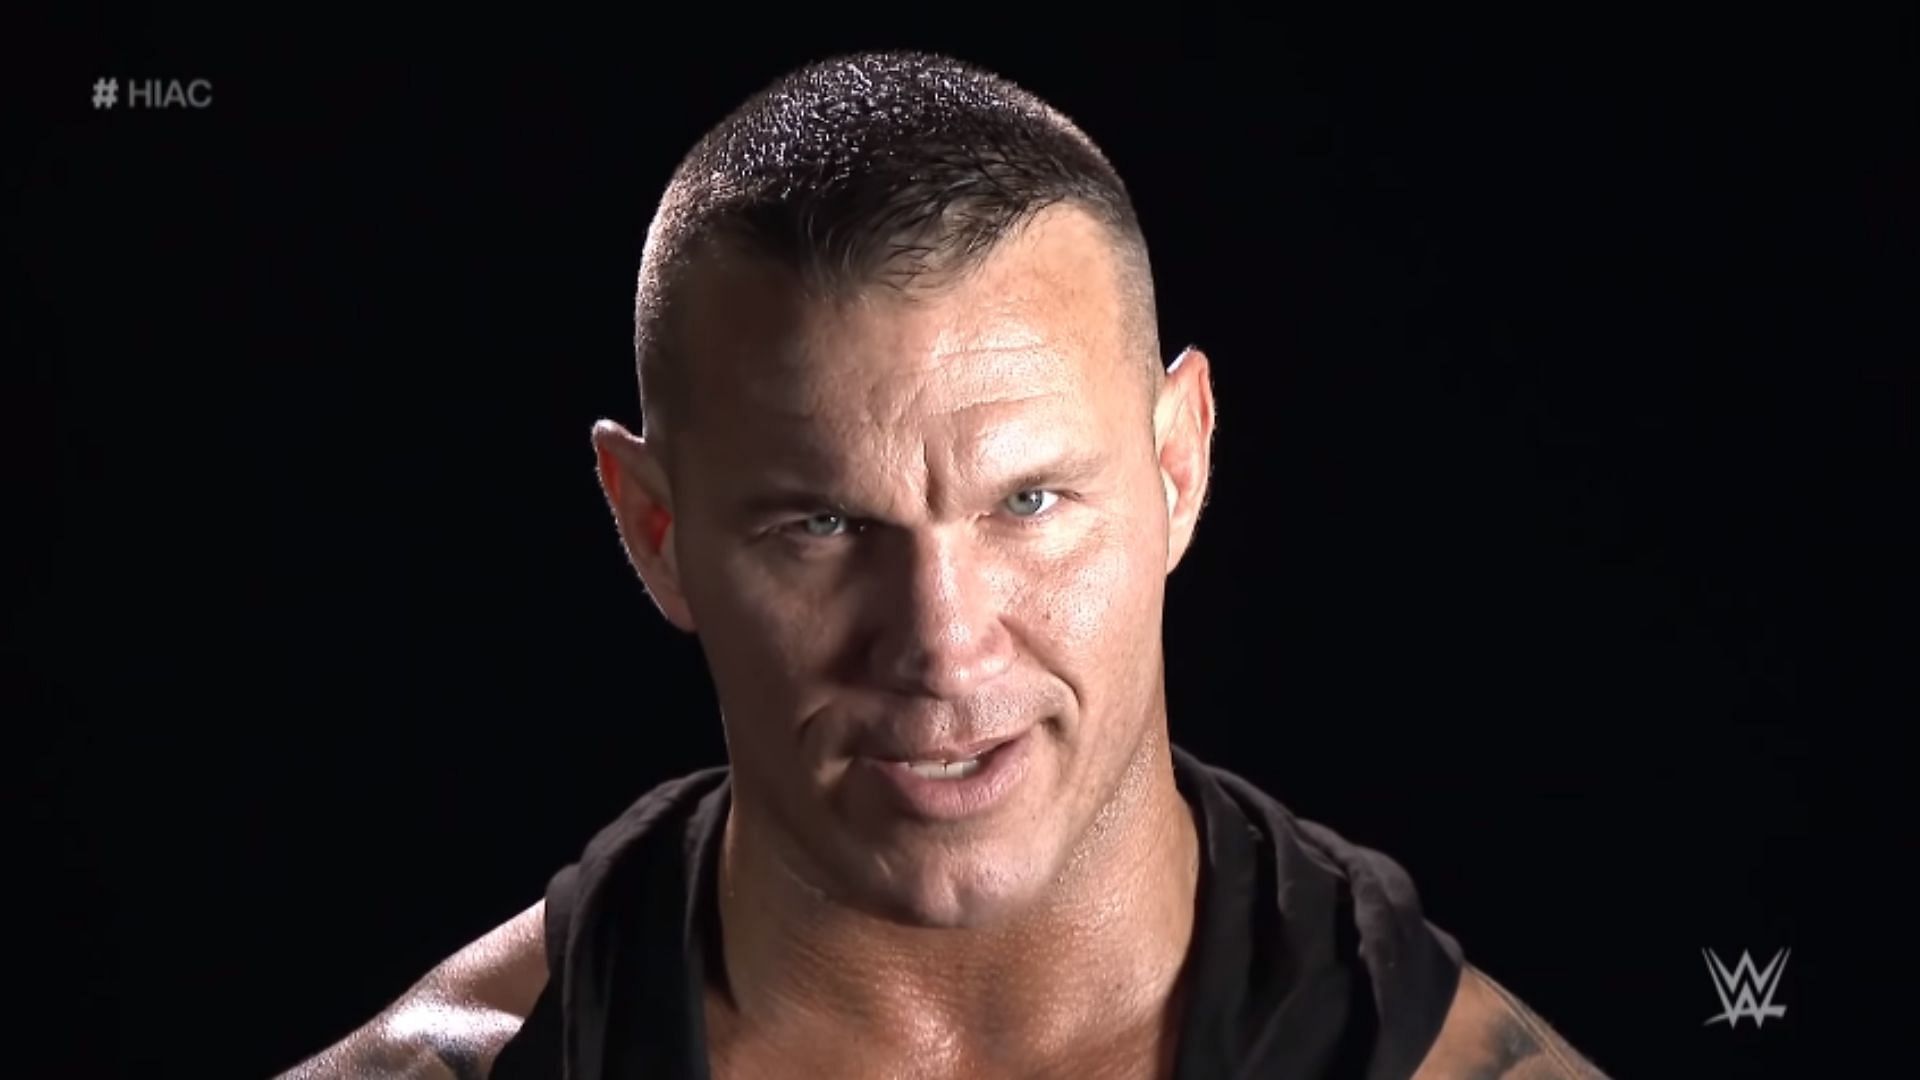 Randy Orton is a 14-time world champion and third-generation wrestler.